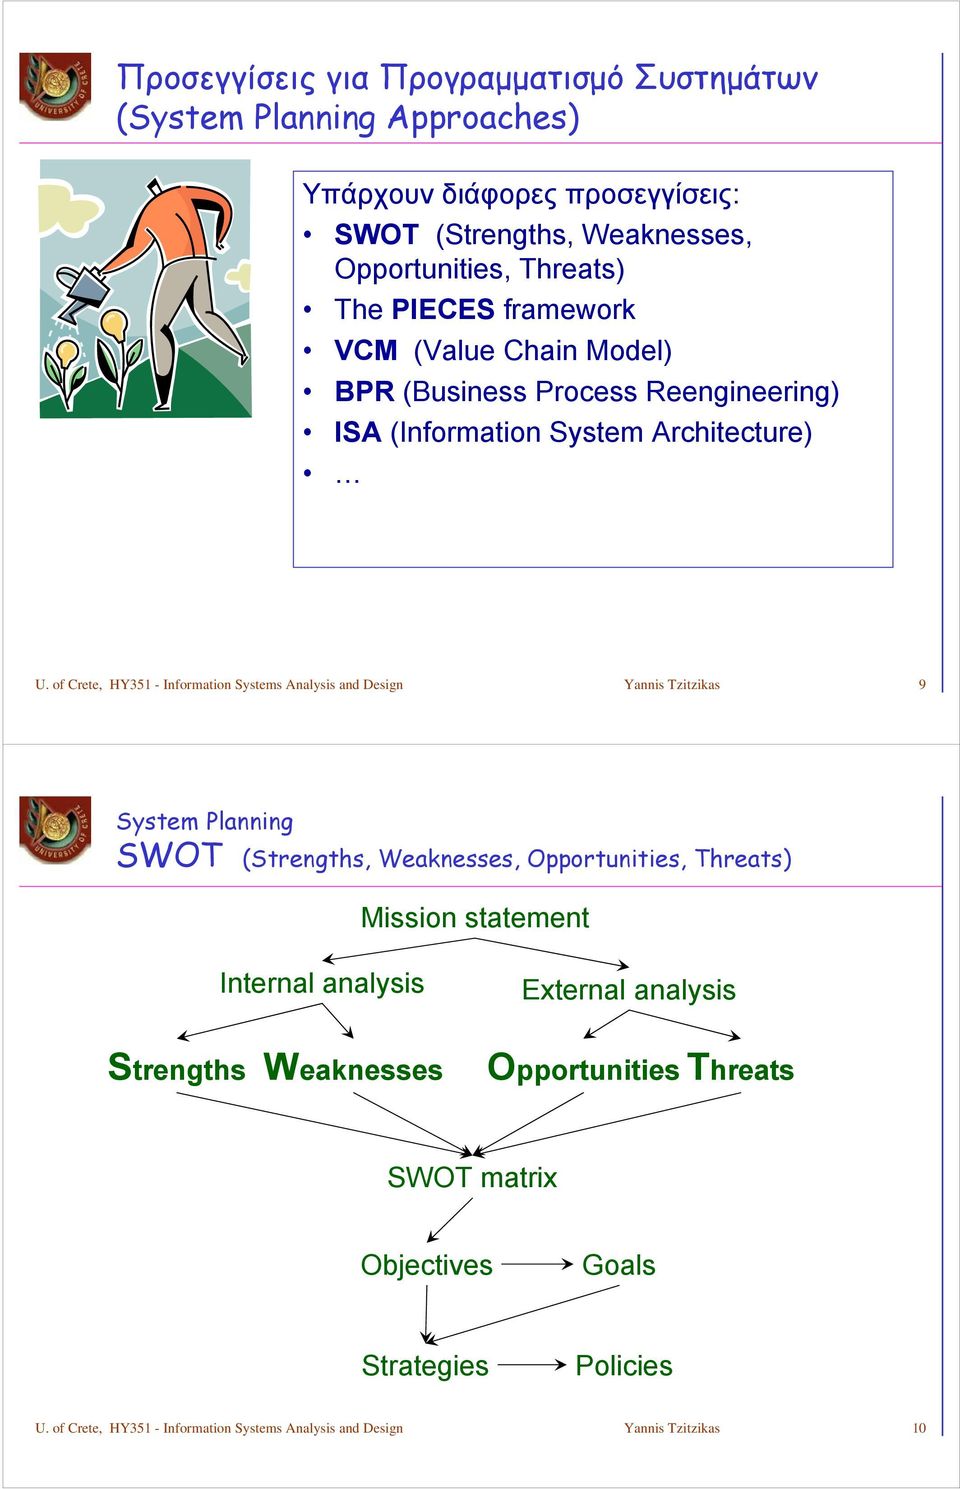 of Crete, HY351 - Information Systems Analysis and Design Yannis Tzitzikas 9 System Planning SWOT (Strengths, Weaknesses, Opportunities, Threats) Mission